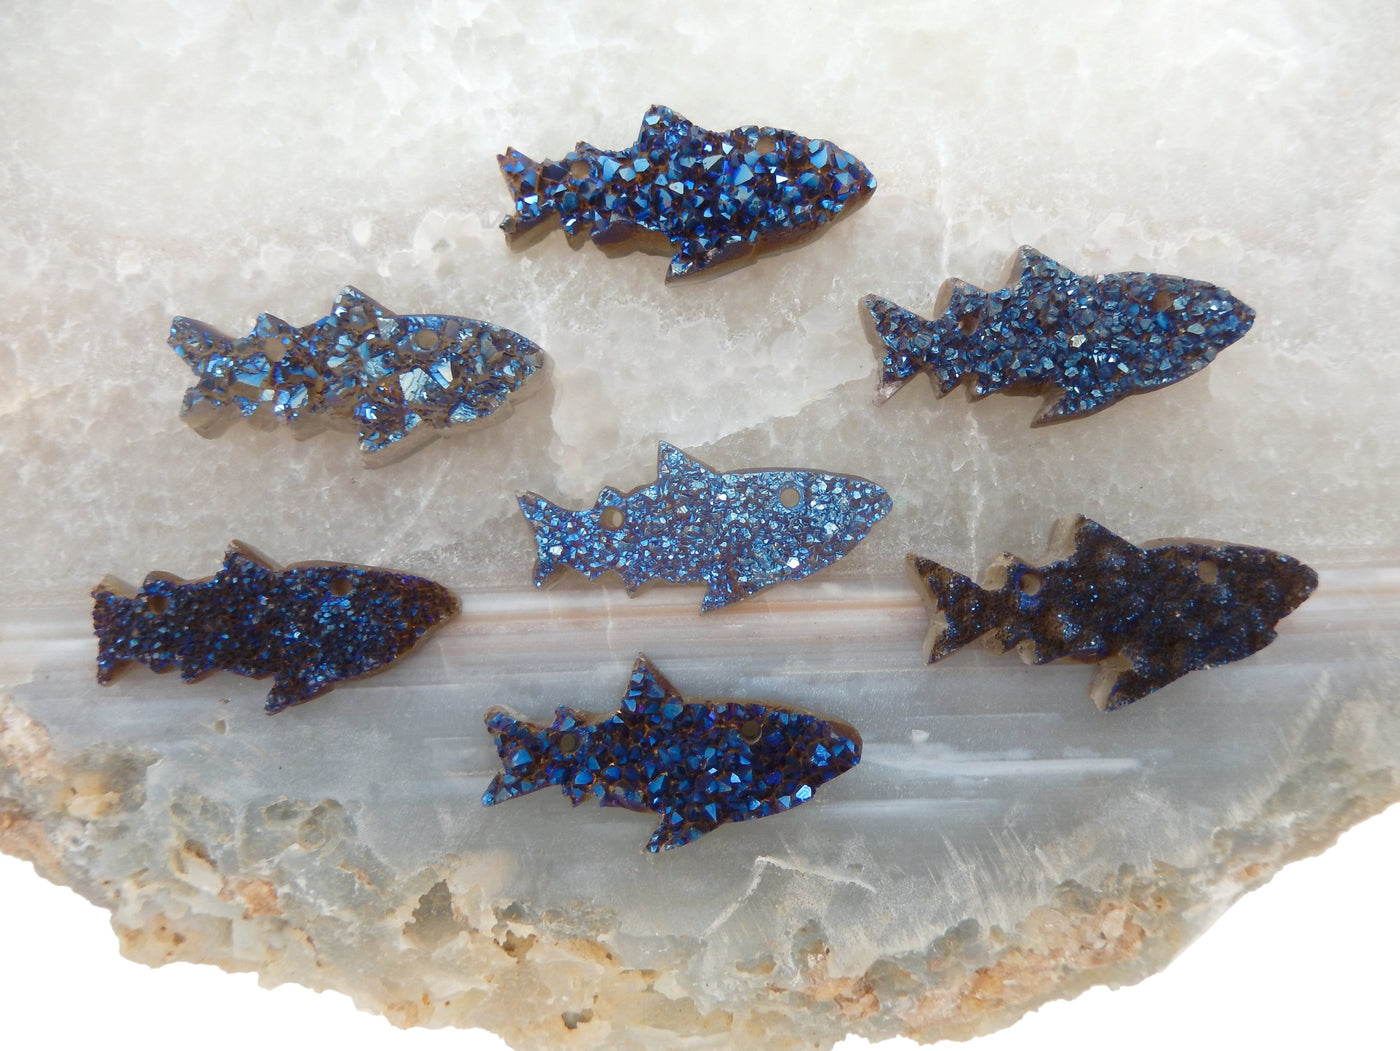 7 Mystic Blue Shark Fish Cluster Cabochons on agate slice